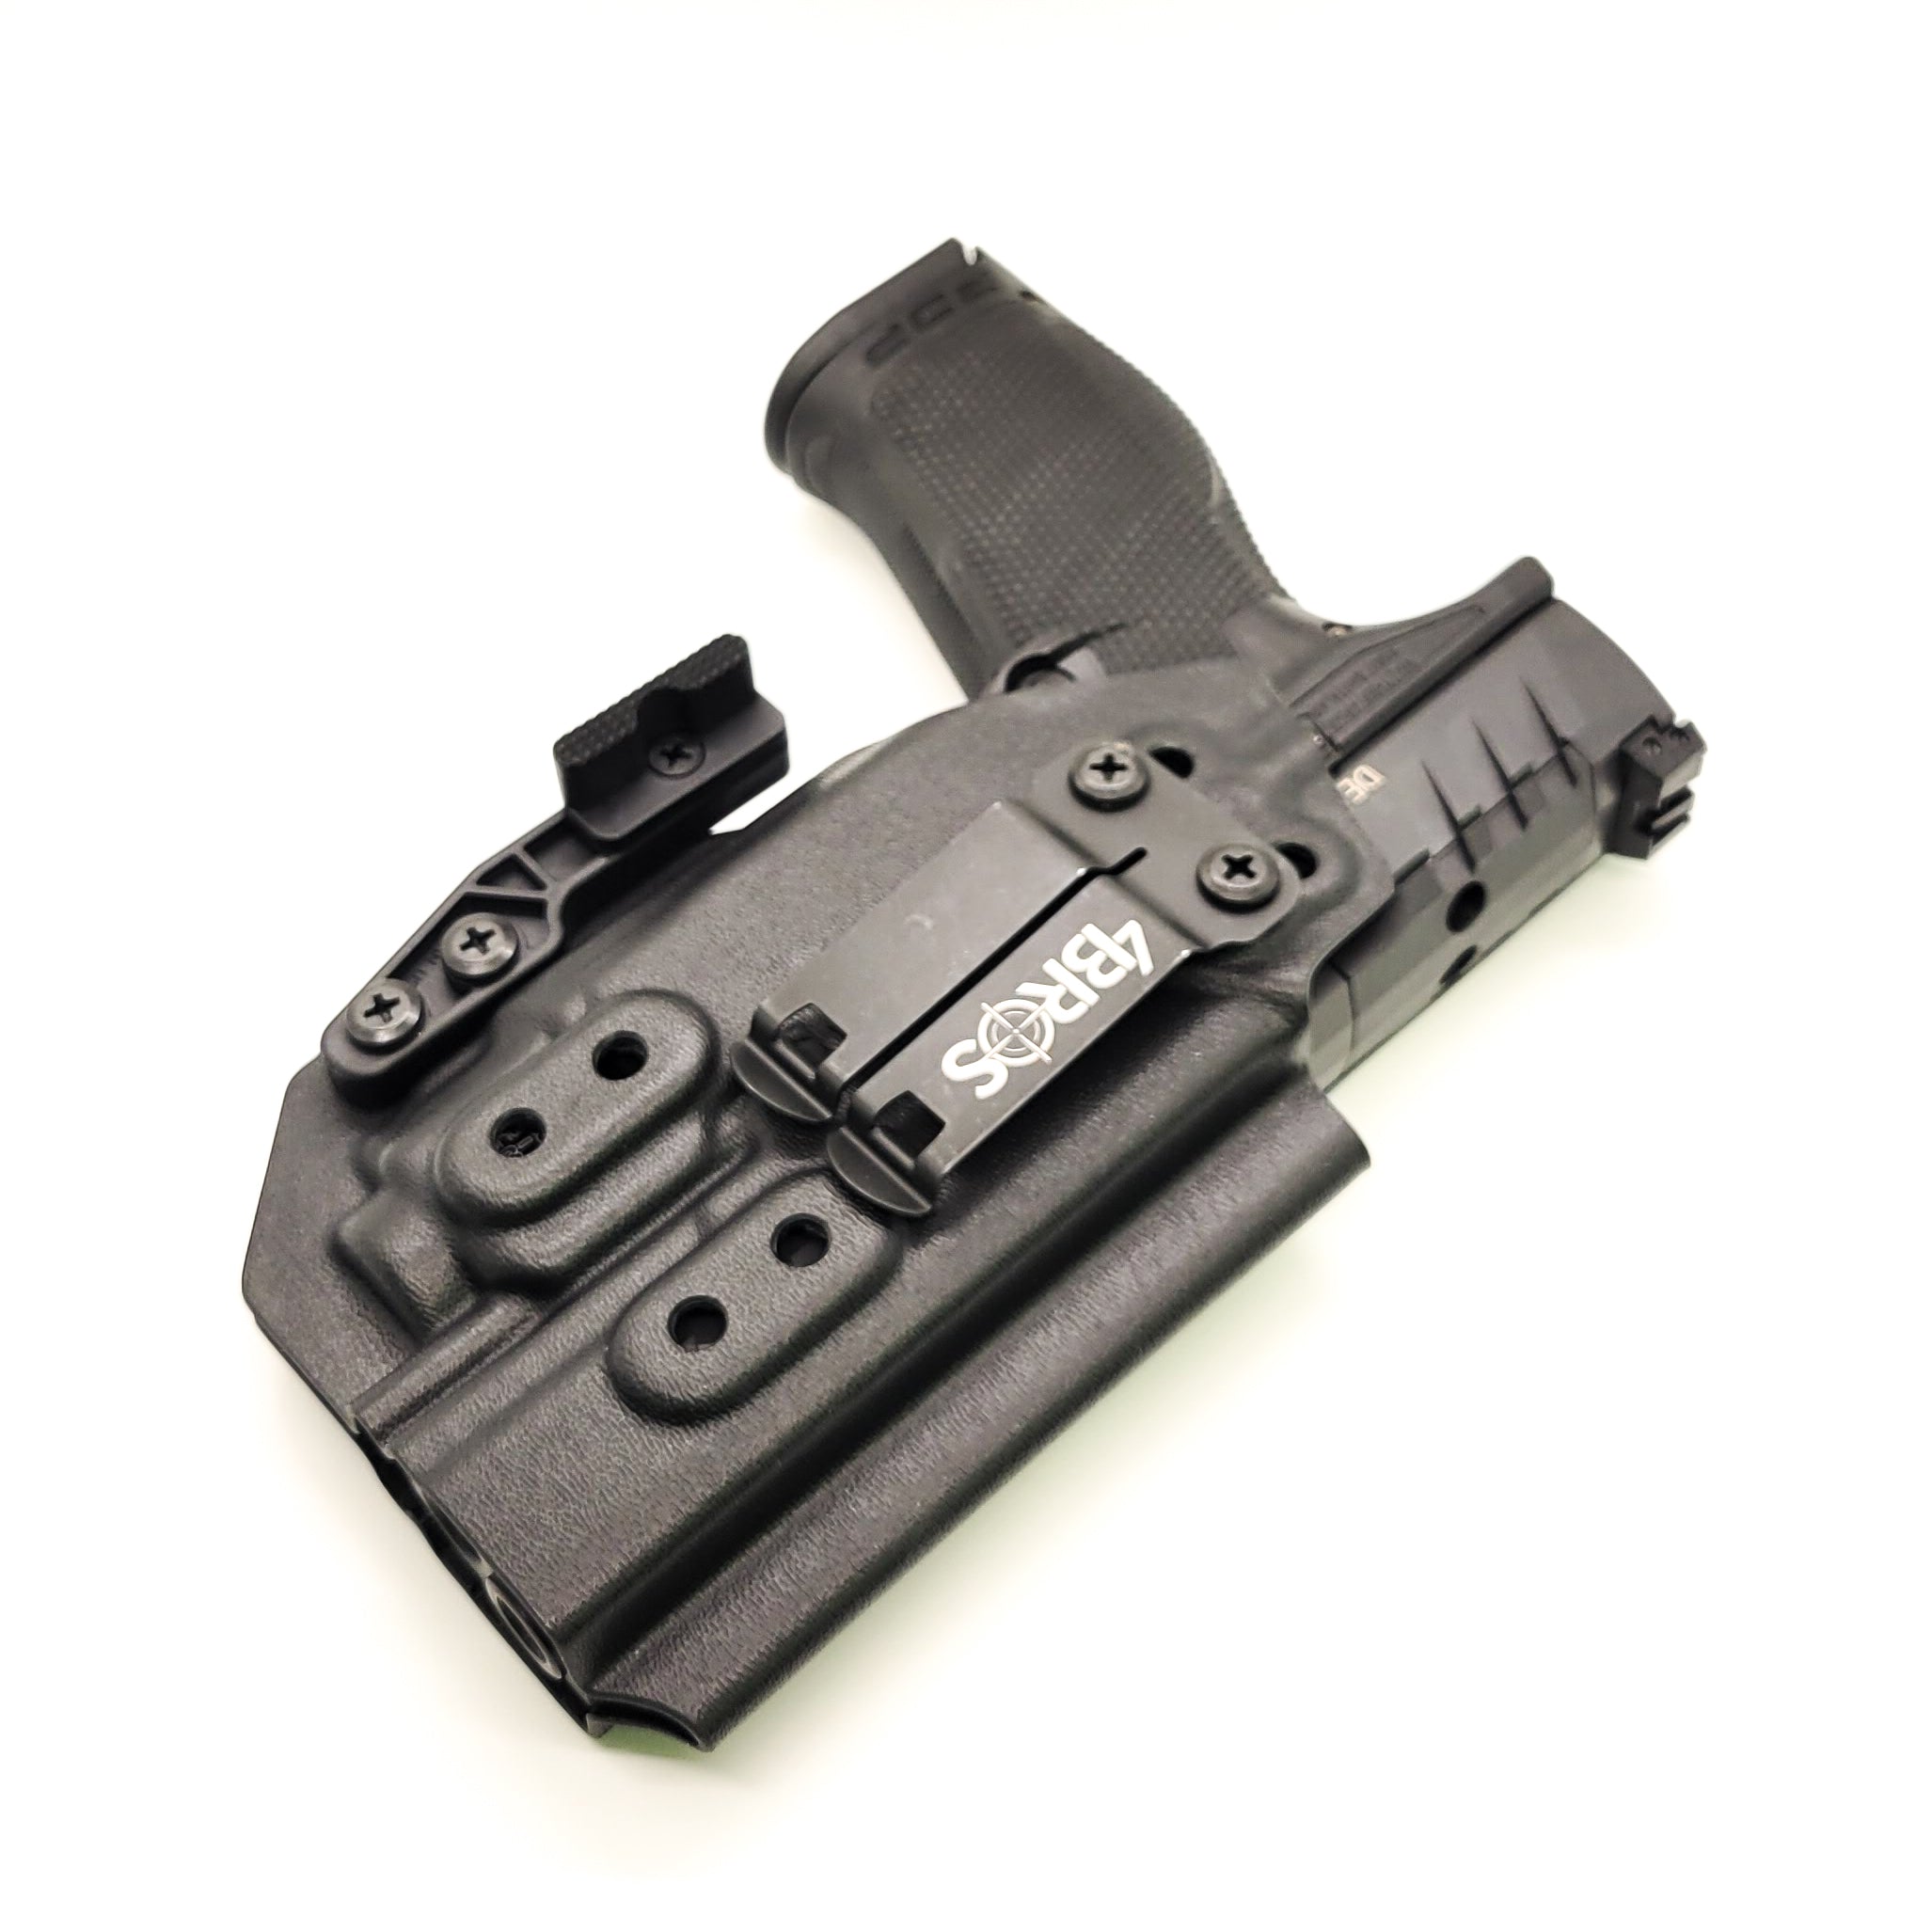 For the best concealed carry Inside Waistband IWB AIWB Holster designed to fit the Walther PDP 4.5" Full-Size pistol with the Streamlight TLR-8 mounted on the firearm, shop Four Brothers Holsters. Cut for red dot sight, full sweat guard, adjustable retention & open muzzle for threaded barrels & compensators.